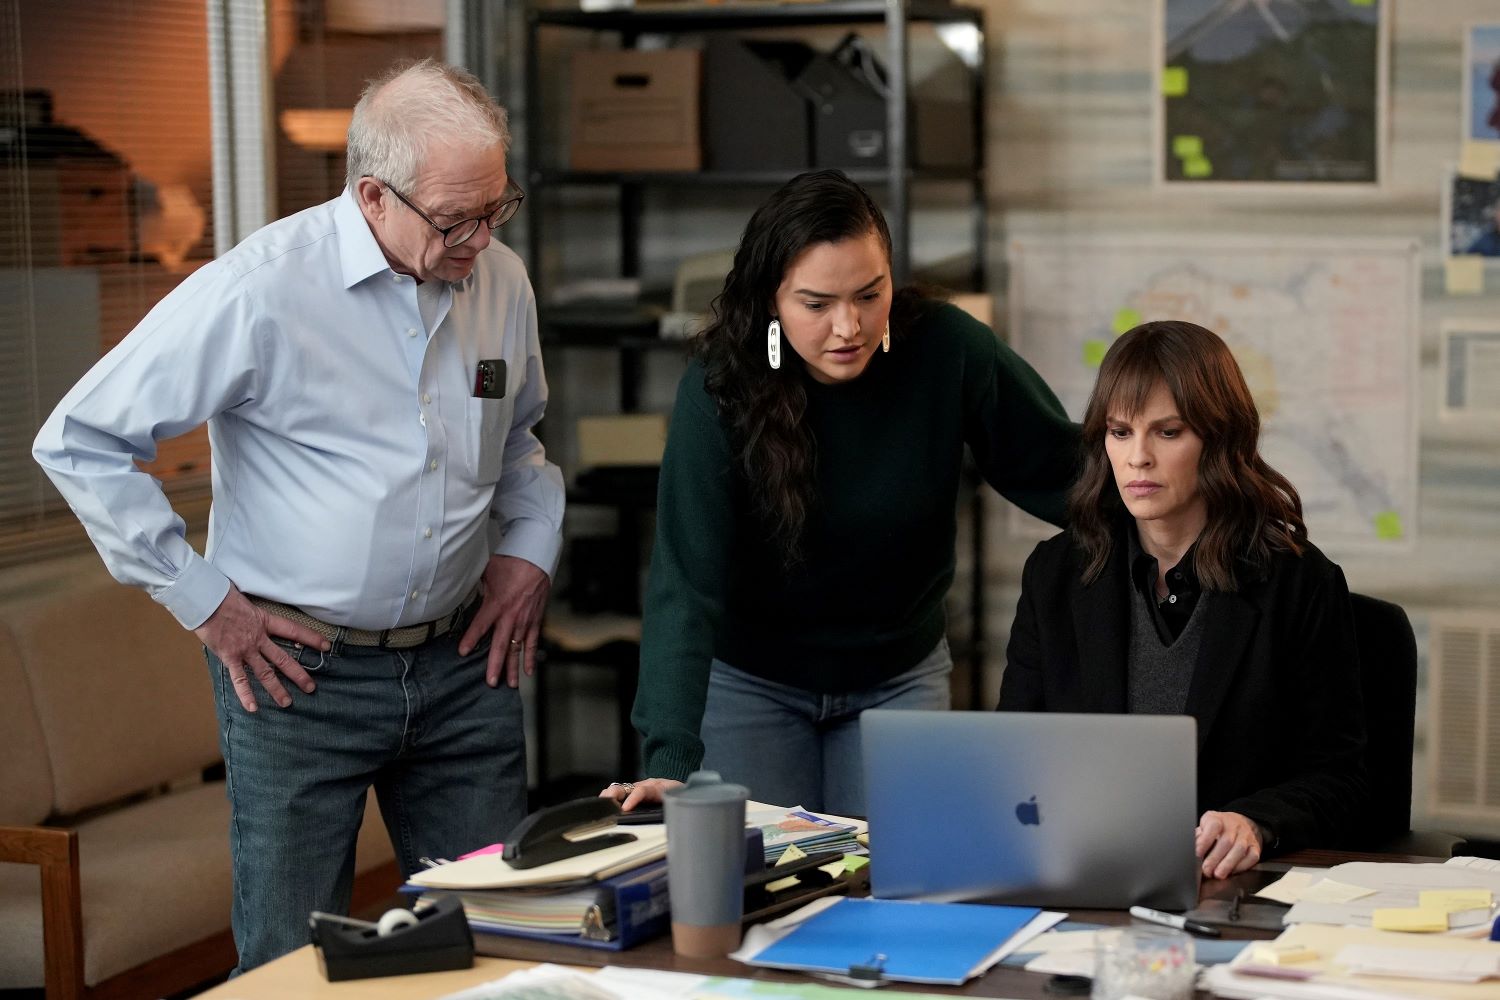 Jeff Perry as Stanley, Grace Dove as Roz, and Hilary Swank as Eileen in 'Alaska Daily' Episode 11.